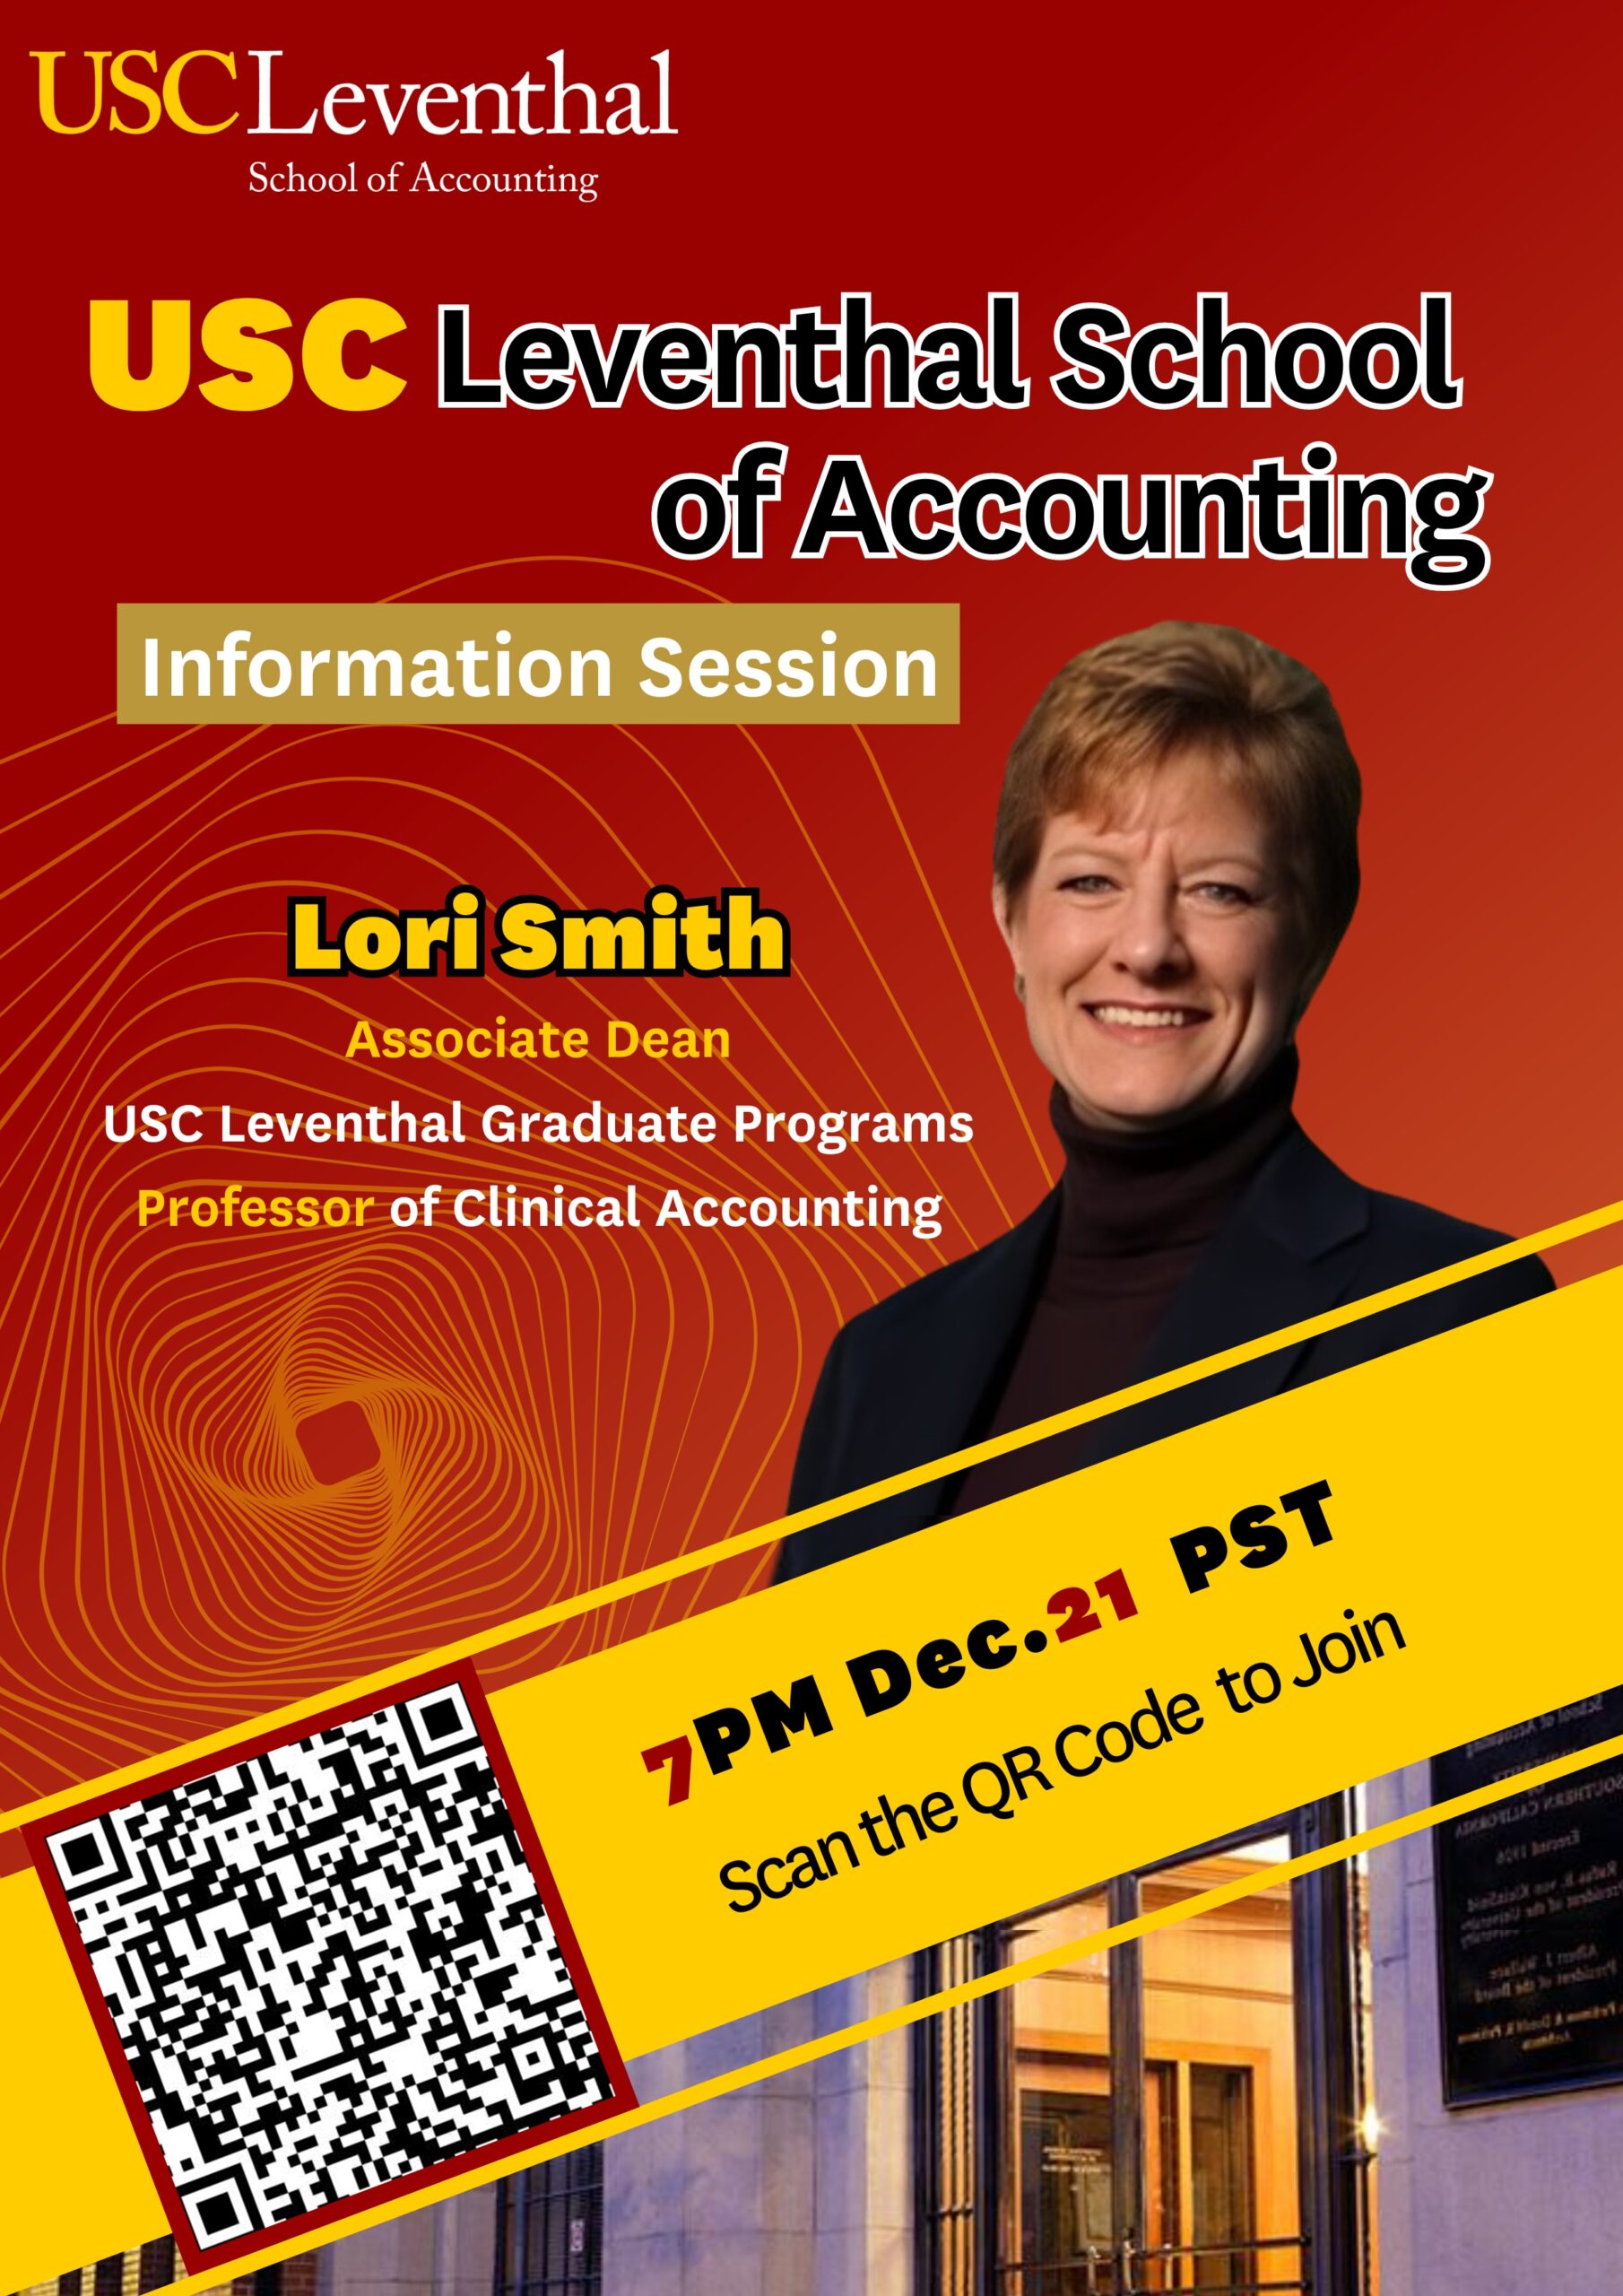 USC Leventhal School of Accounting Information Session